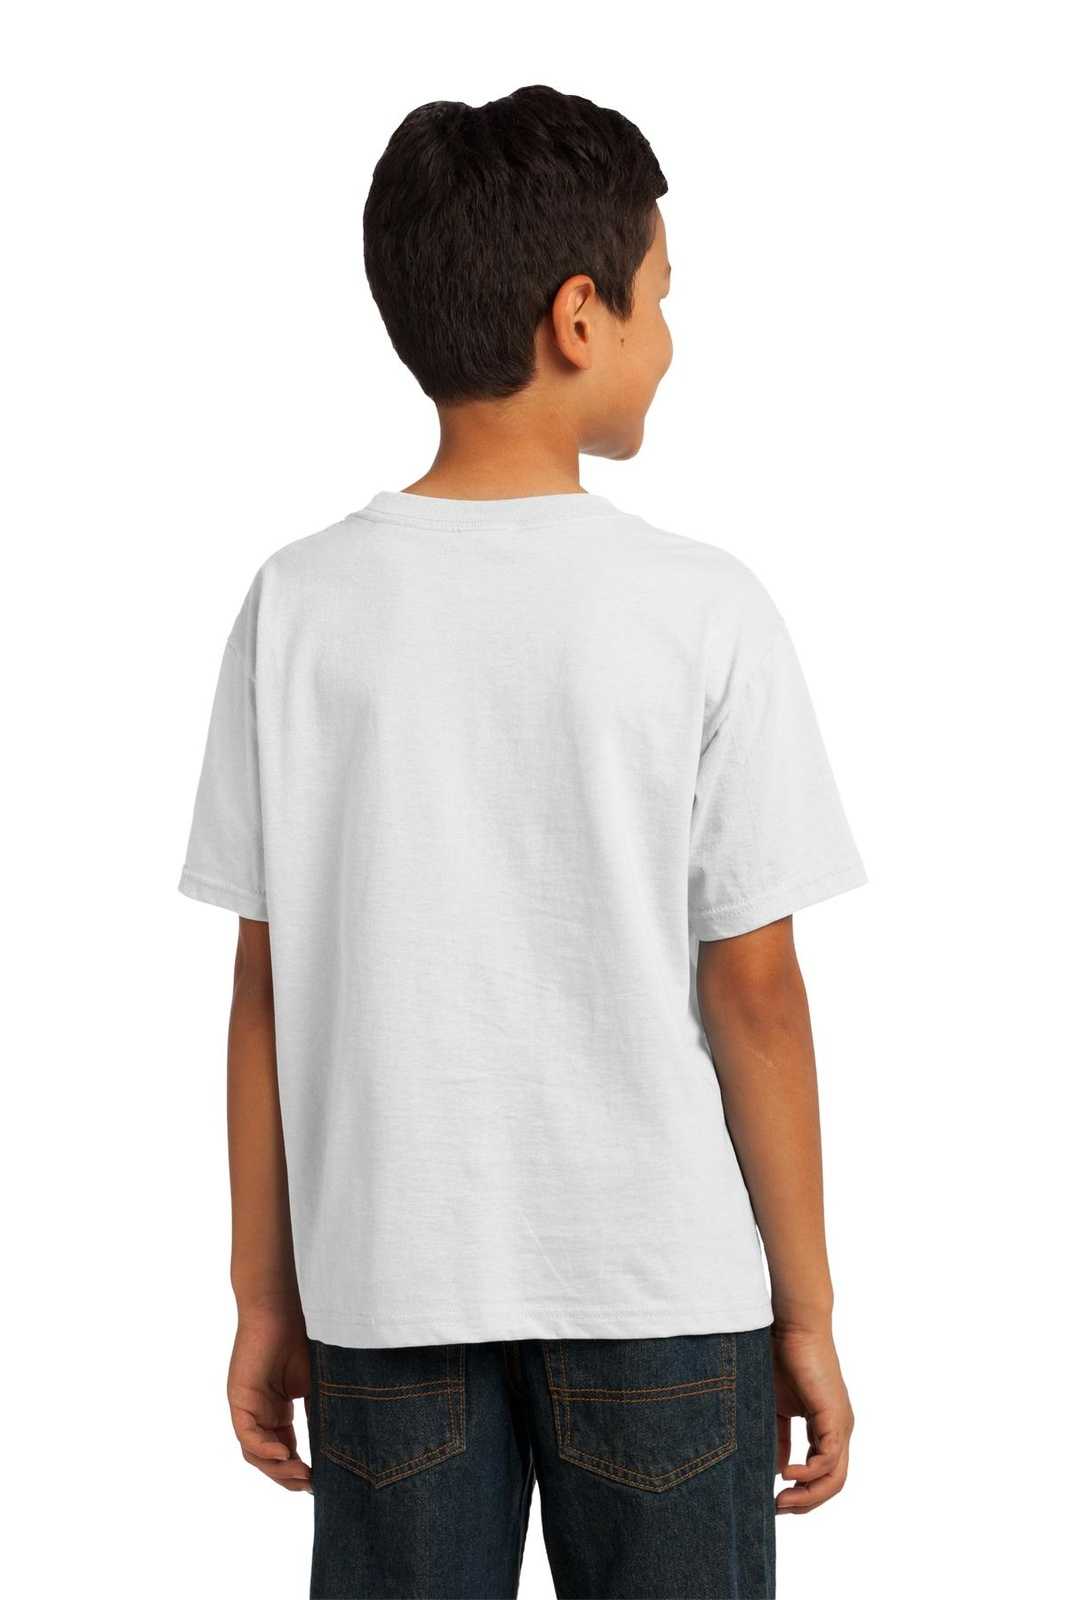 Fruit of the Loom 3930B Youth HD Cotton 100% Cotton T-Shirt - White - HIT a Double